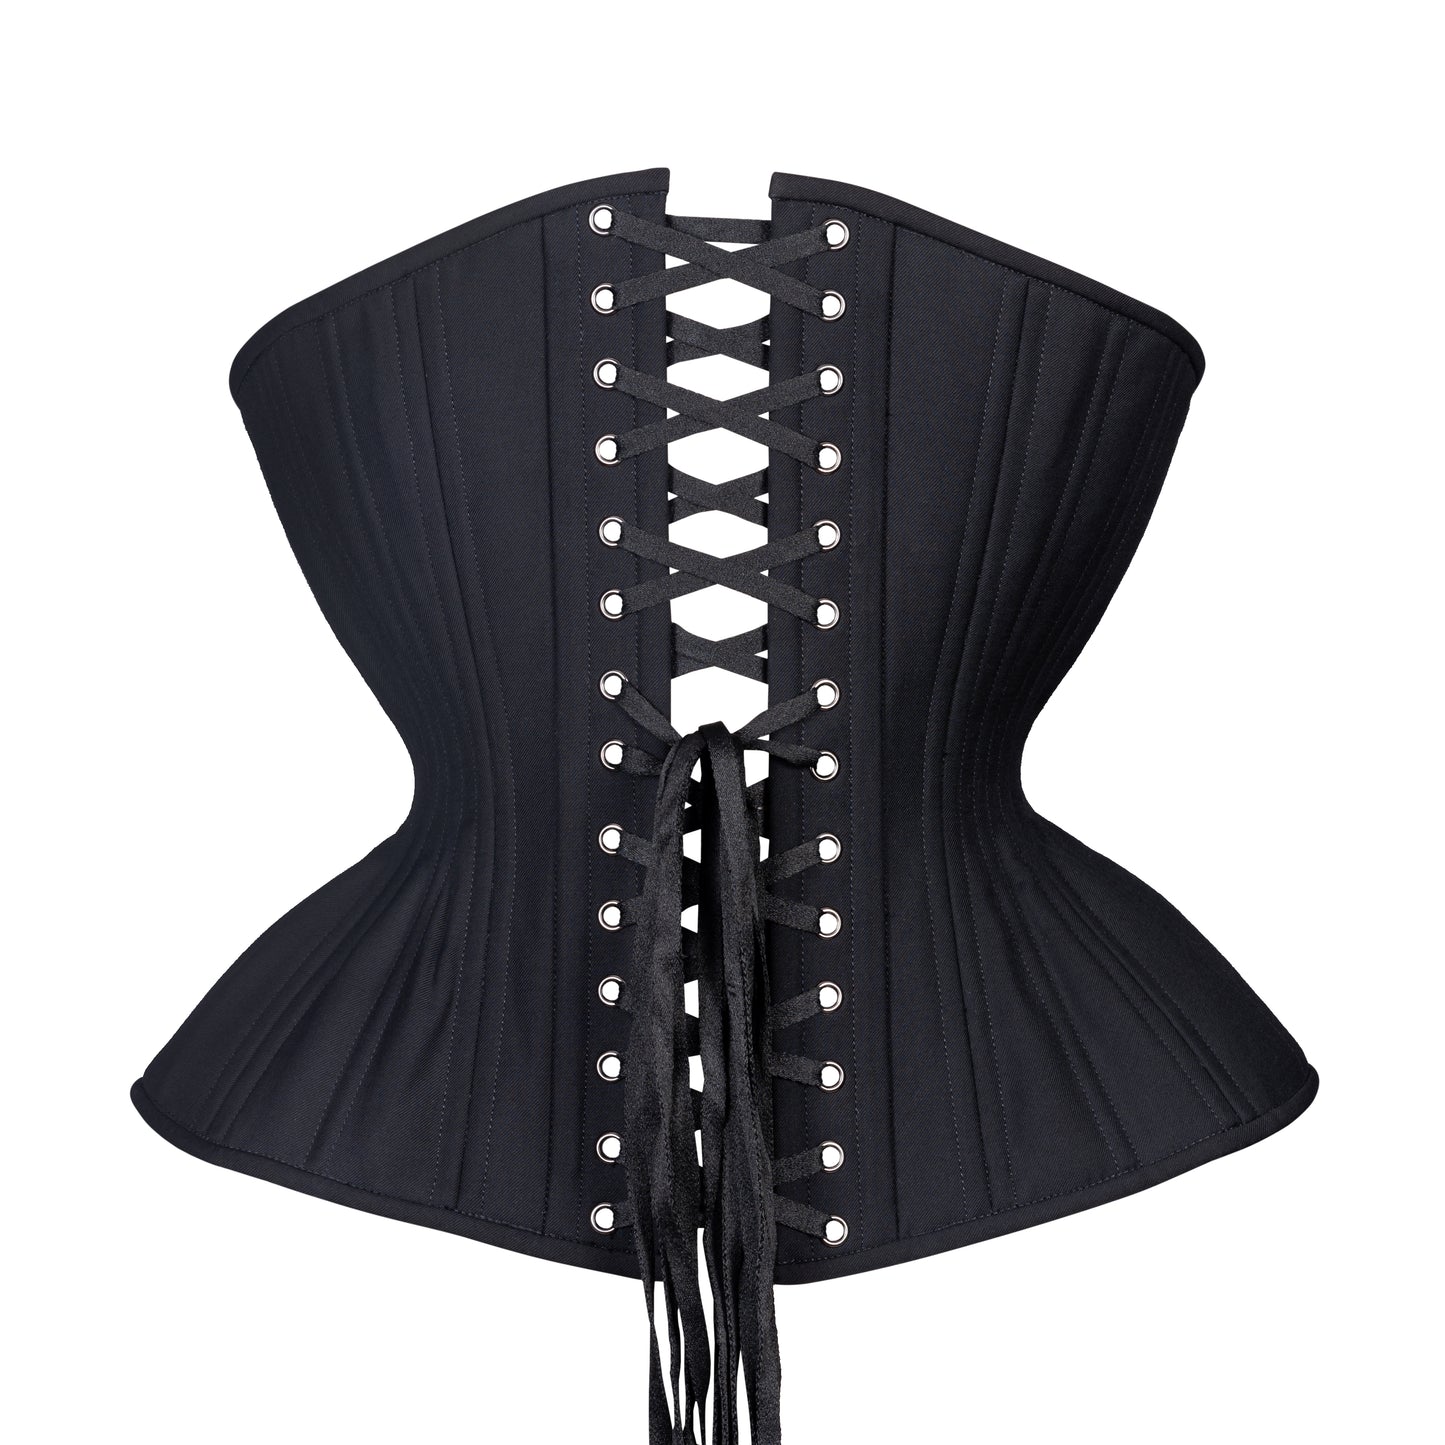 Gemini Cupped Black Corset – Timeless Trends